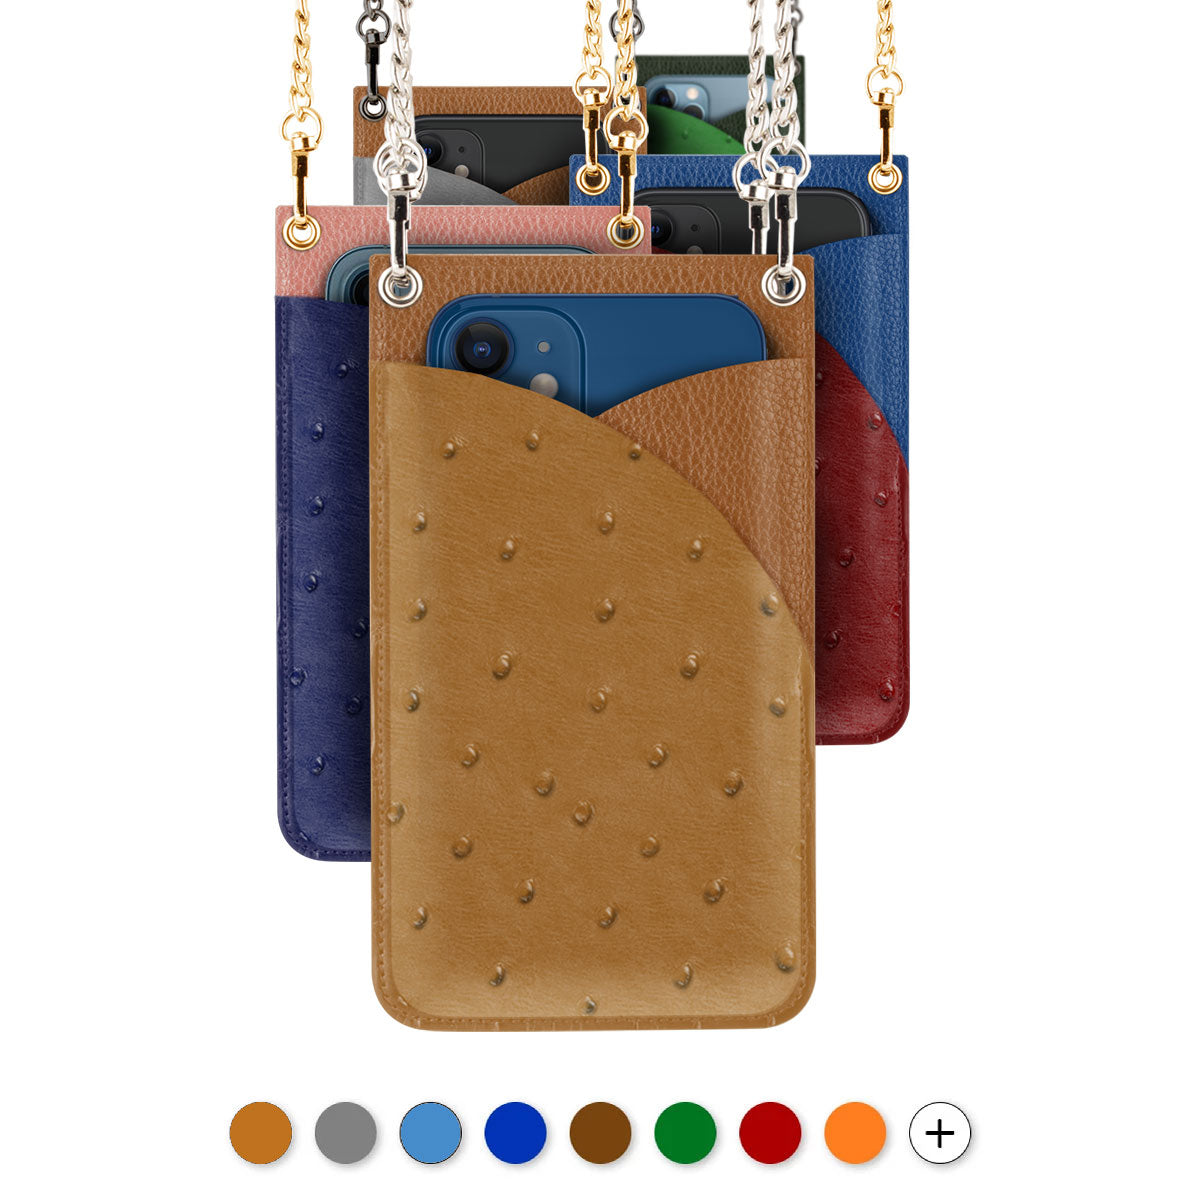 iPhone leather Cross-body Bag - iPhone 12 & 11 ( Pro / Max / Mini ) - Ostrich leather